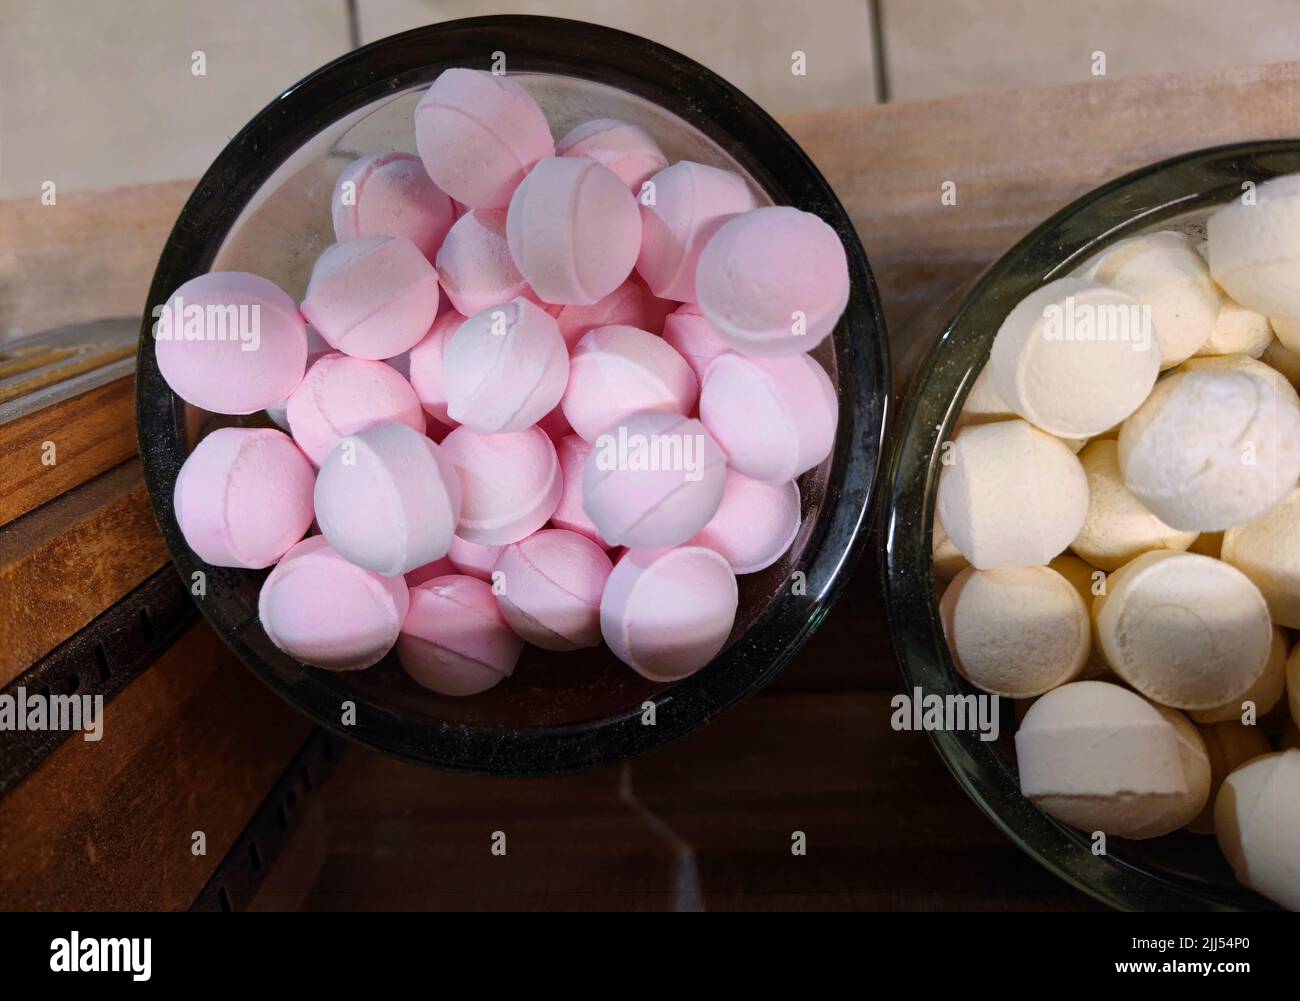 Pink unmarked bath bombs in a jar. There are no people or trademarks in the shot. Stock Photo